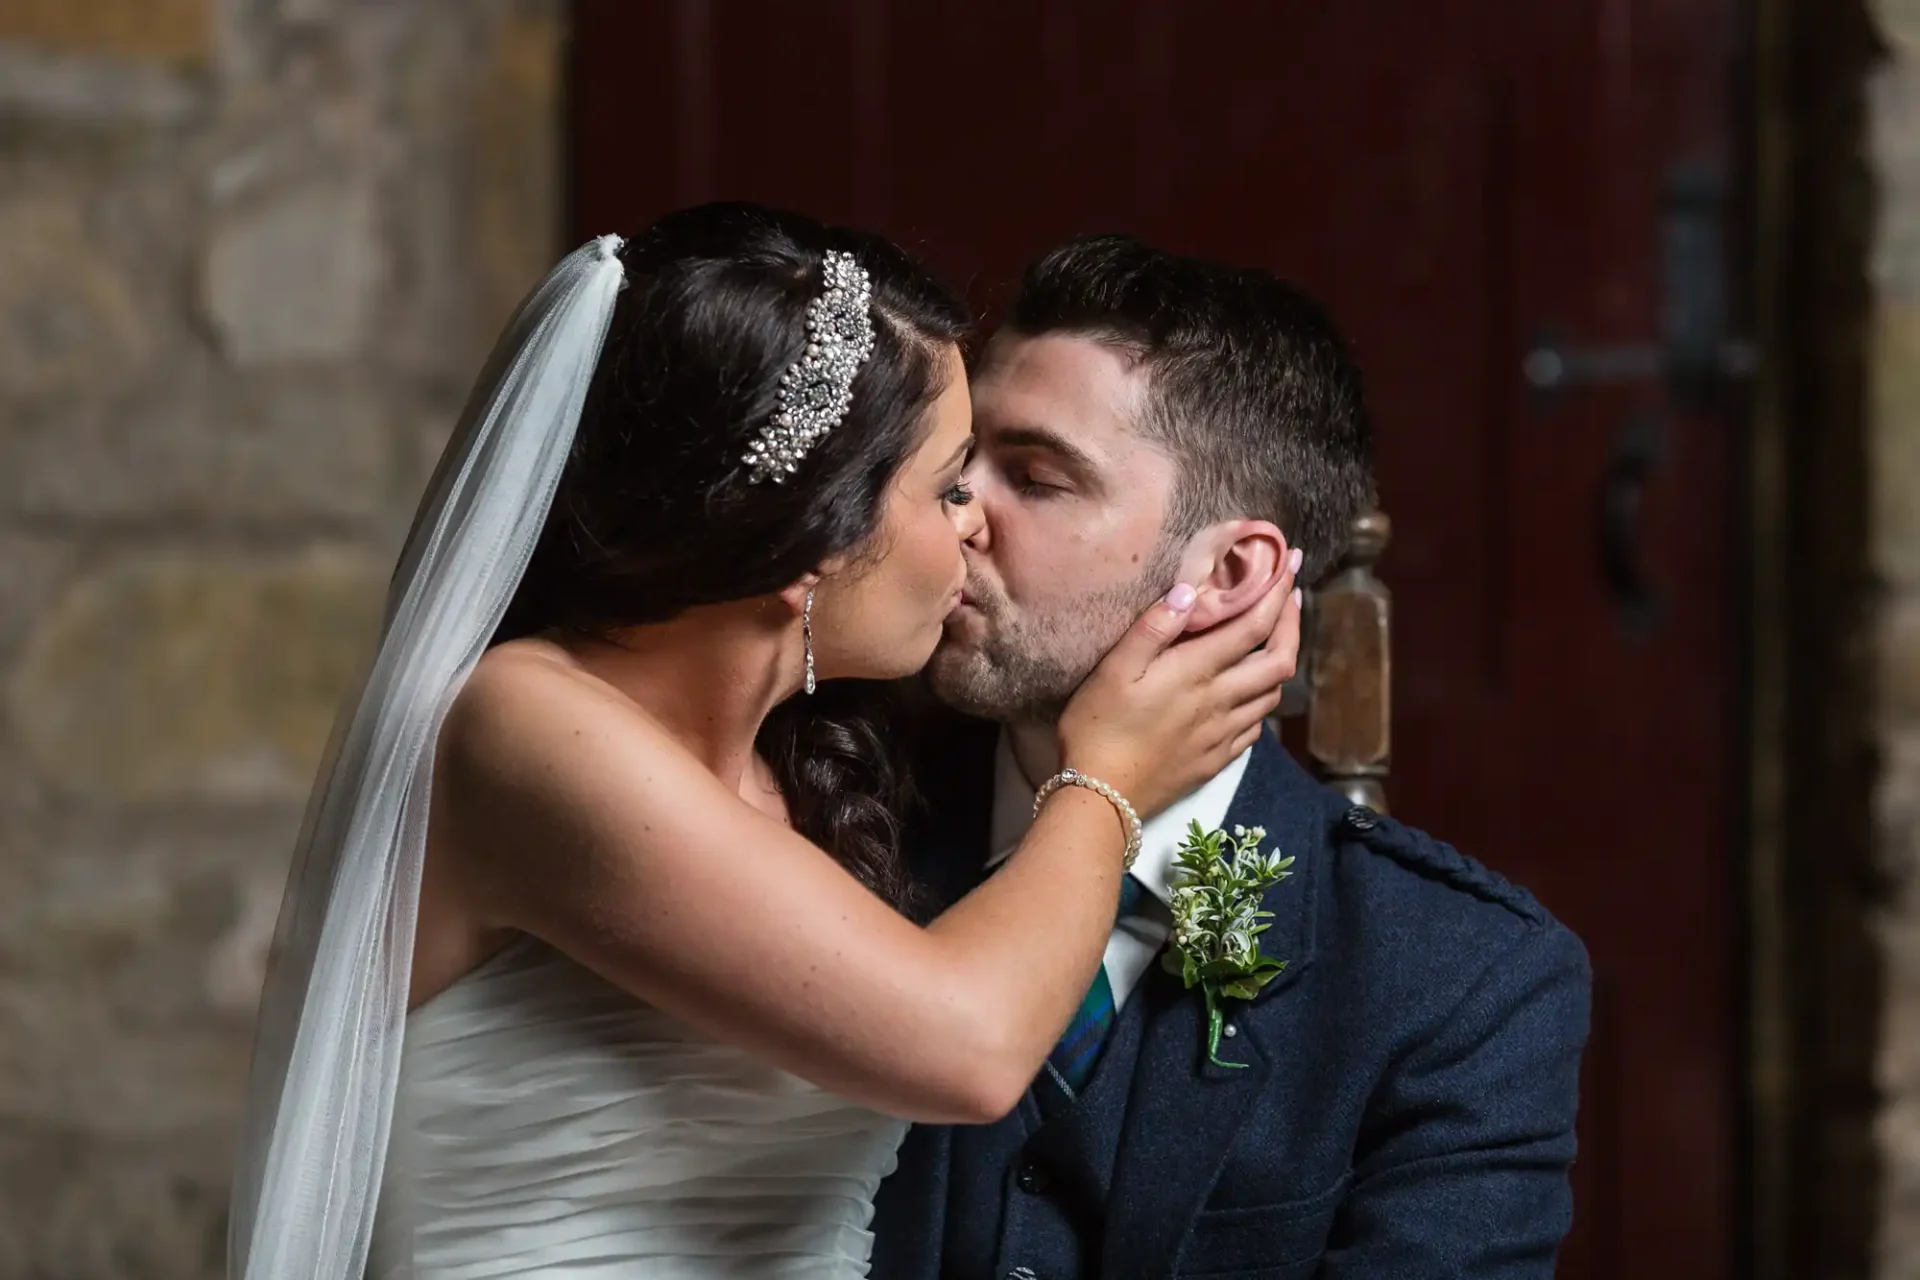 A bride in a white dress and a groom in a blue suit sharing a kiss, with a stone wall and wooden door in the background.